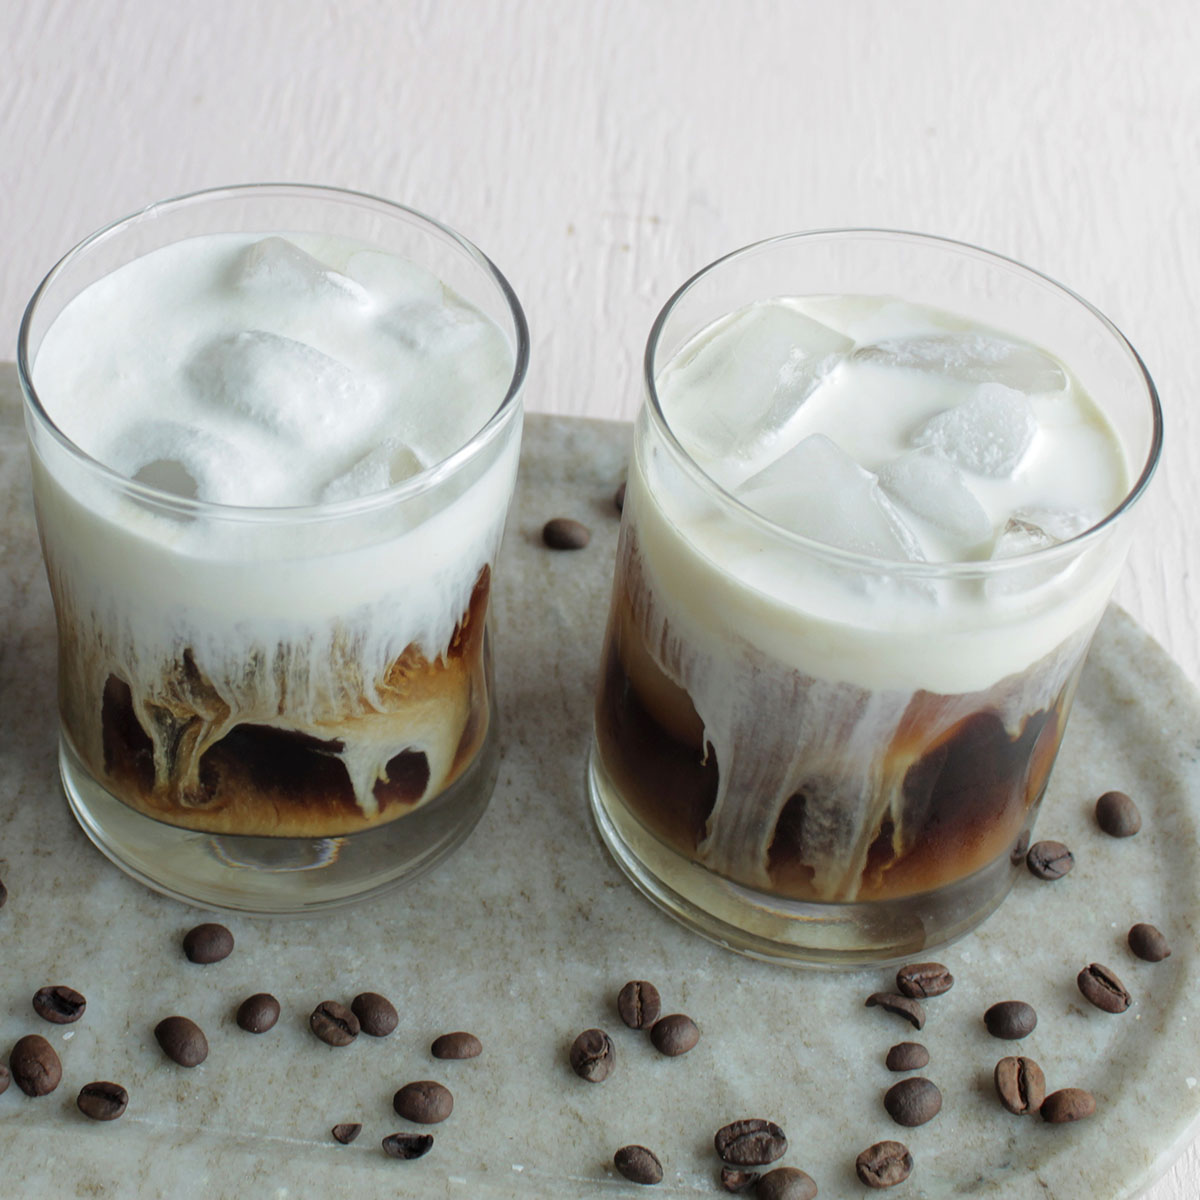 https://homebodyeats.com/wp-content/uploads/2021/10/how-to-make-cold-foam-on-coffee.jpg